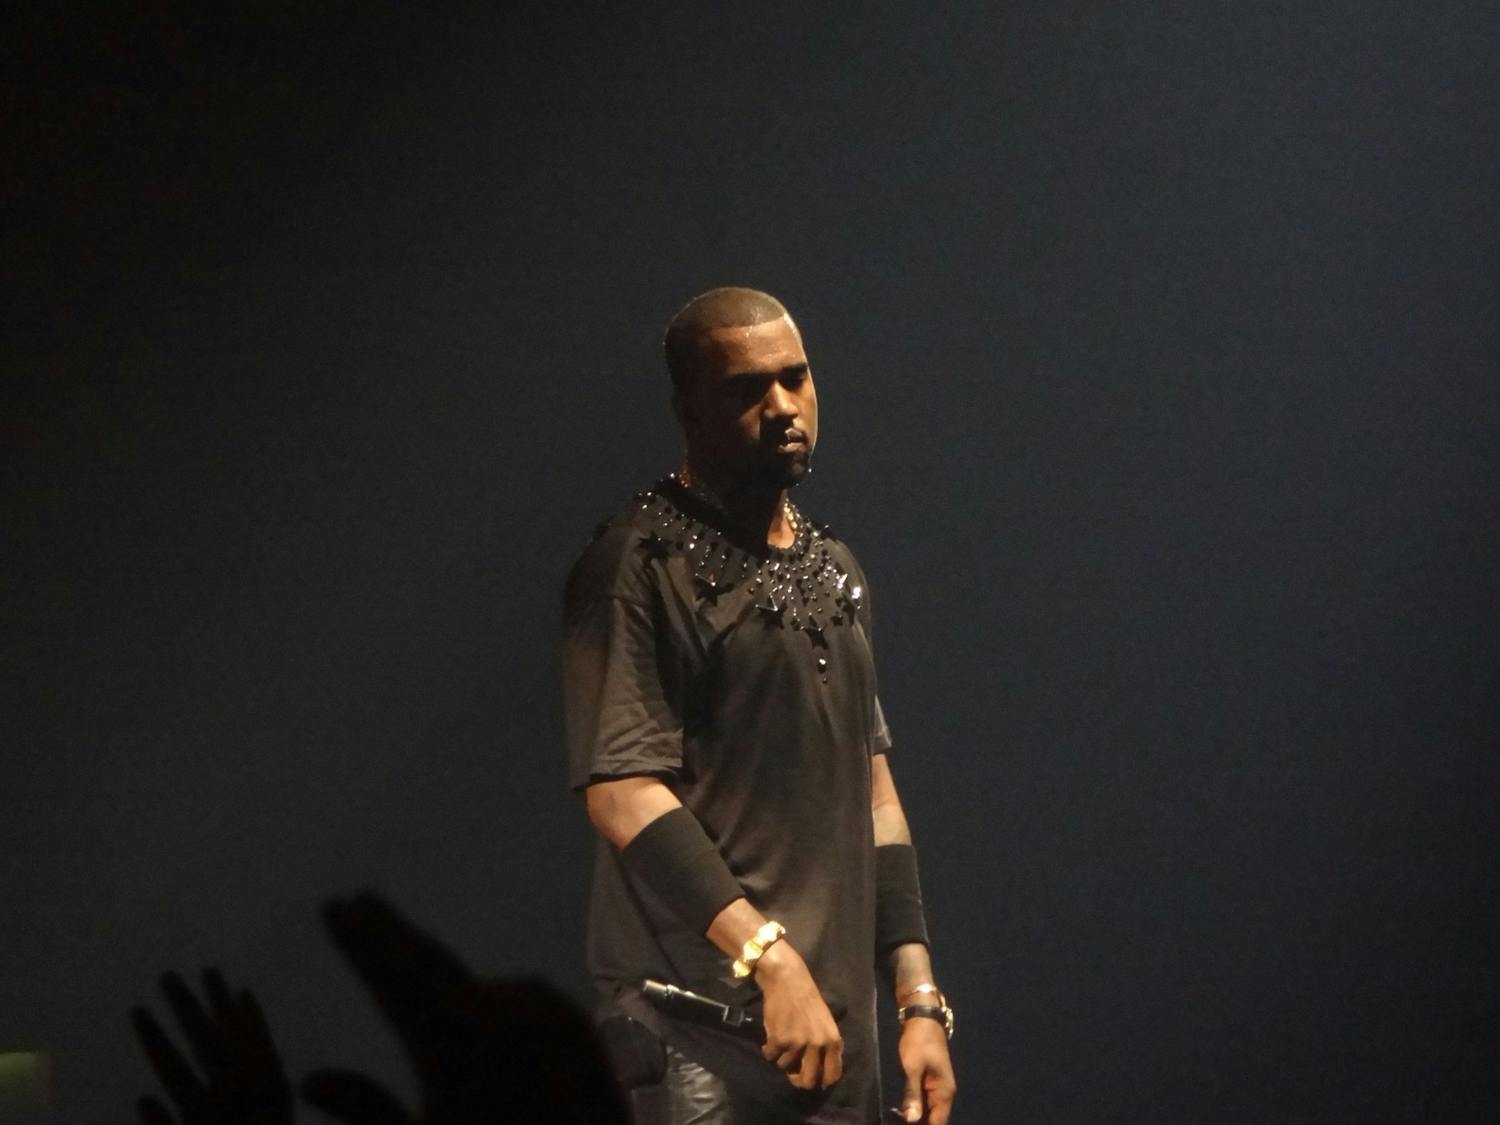 Kanye West released his highly-anticipated ninth album, “Jesus Is King,” last Friday.